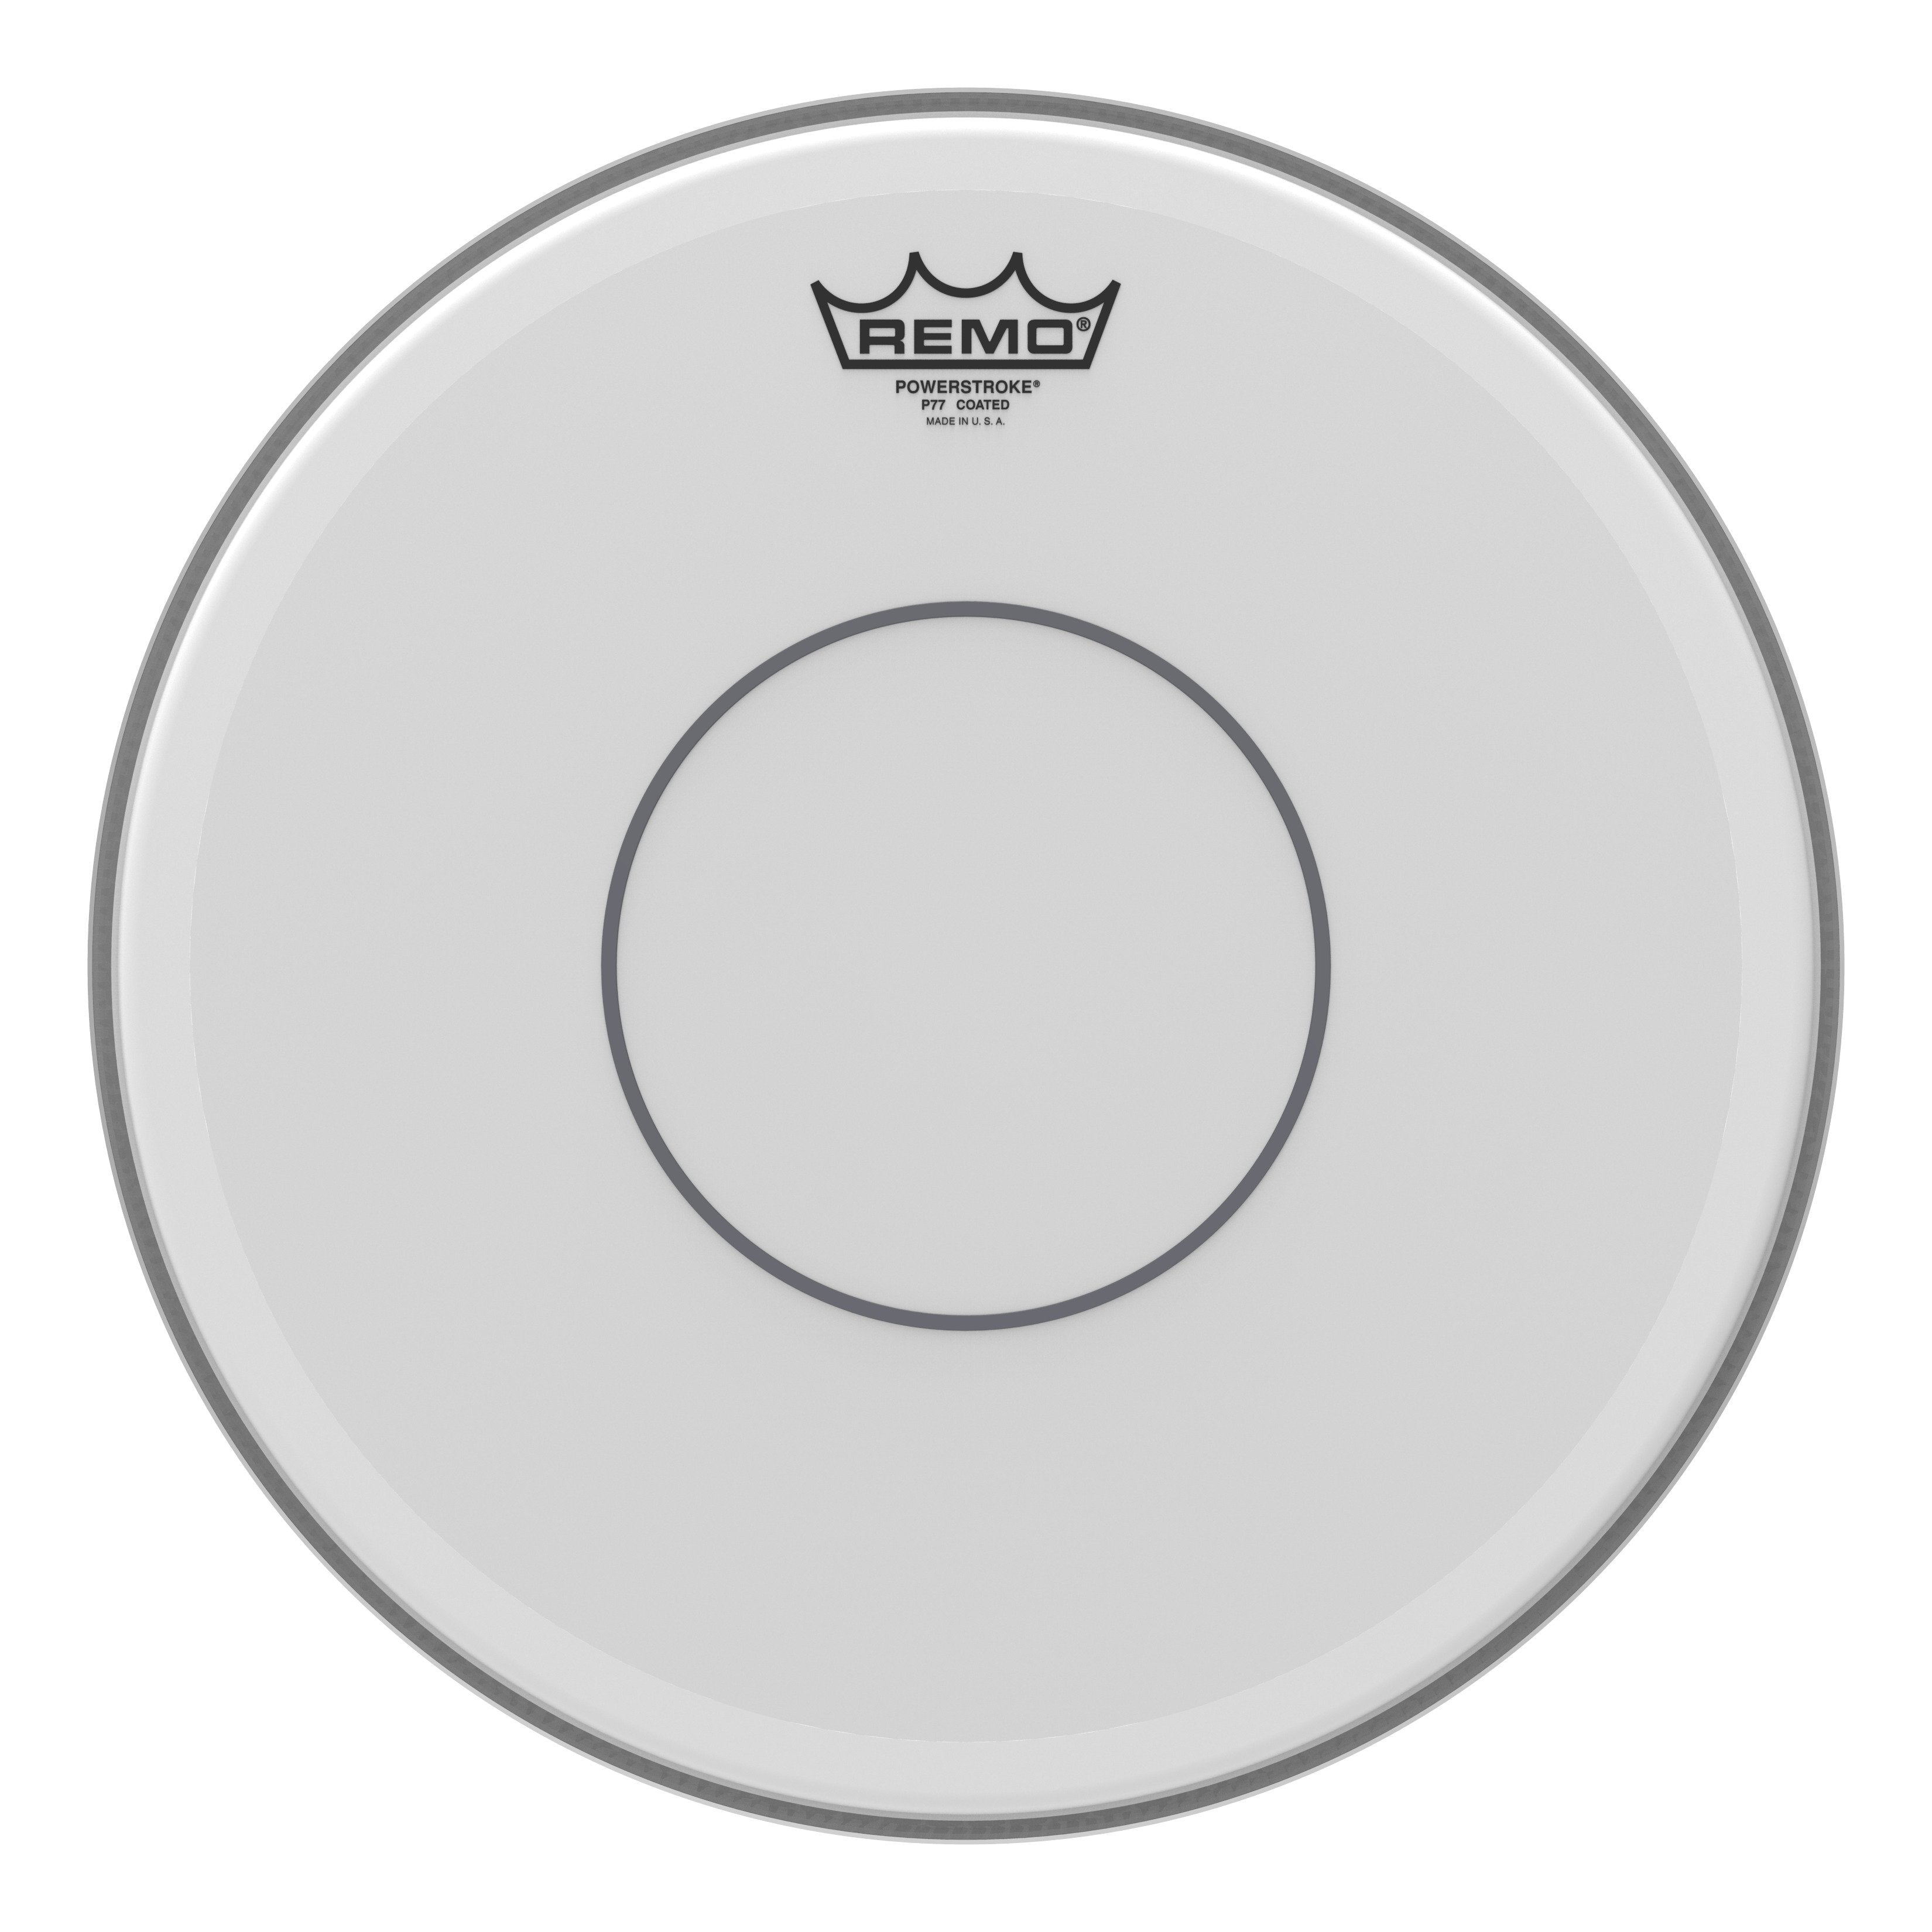 Remo 14" Powerstroke 77 Coated Clear Dot Snare Drum Head (P7-0114-C2) Drum Heads Remo 